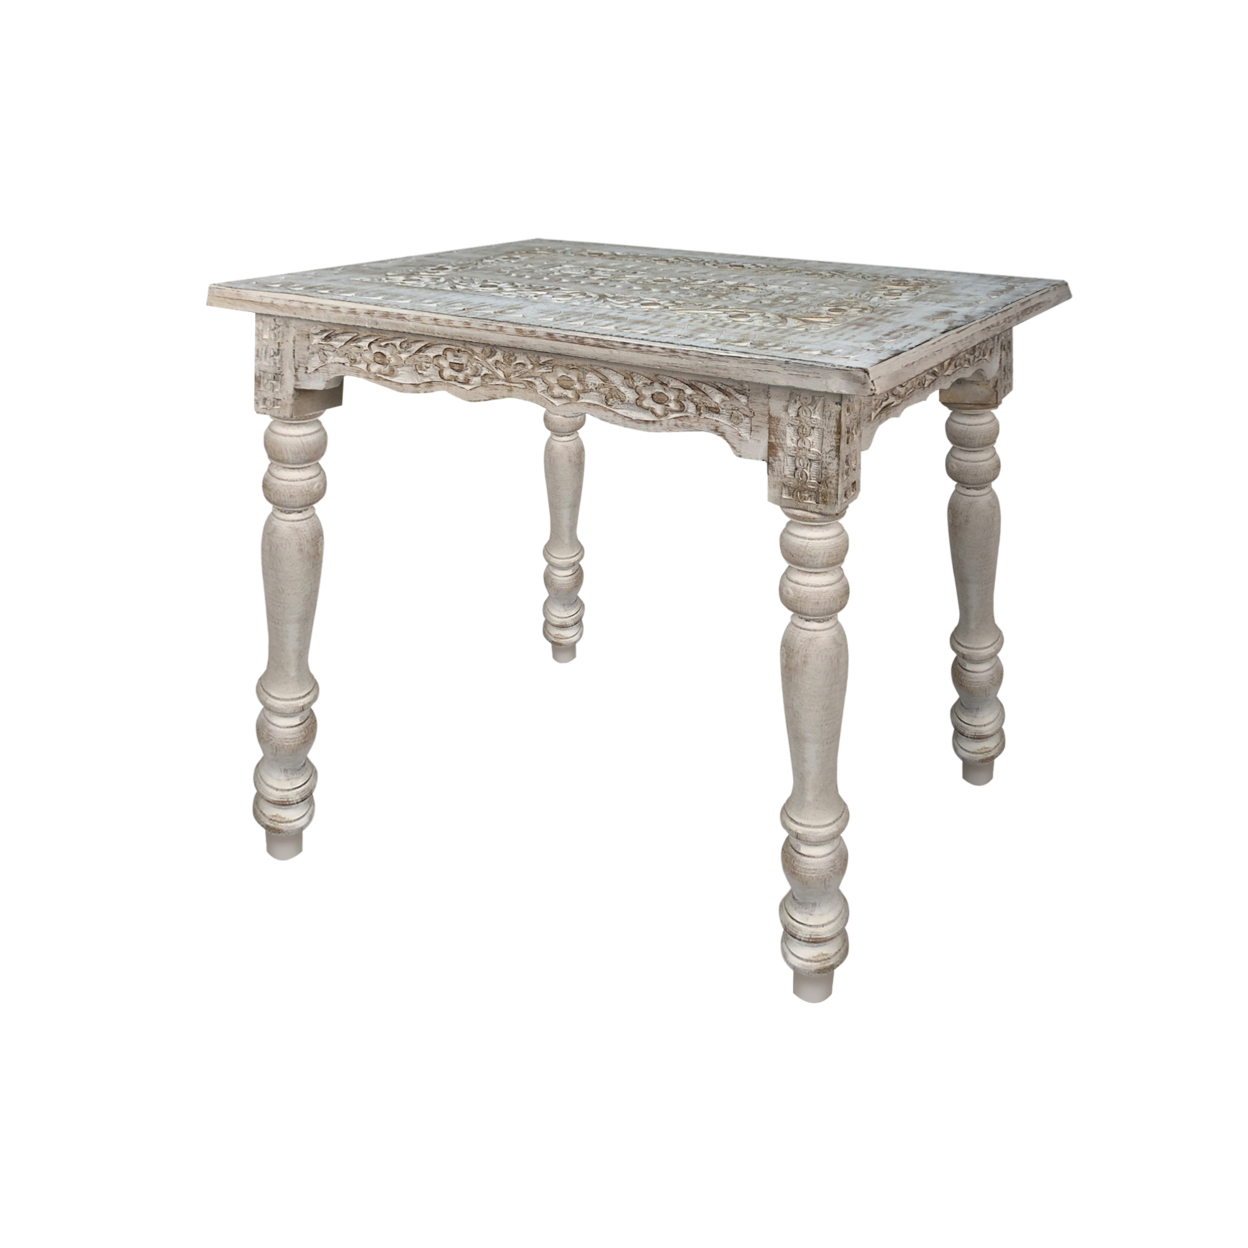 Wooden Side Table With Carved Rectangular Top And Turned Legs, Antique White,Saltoro Sherpi